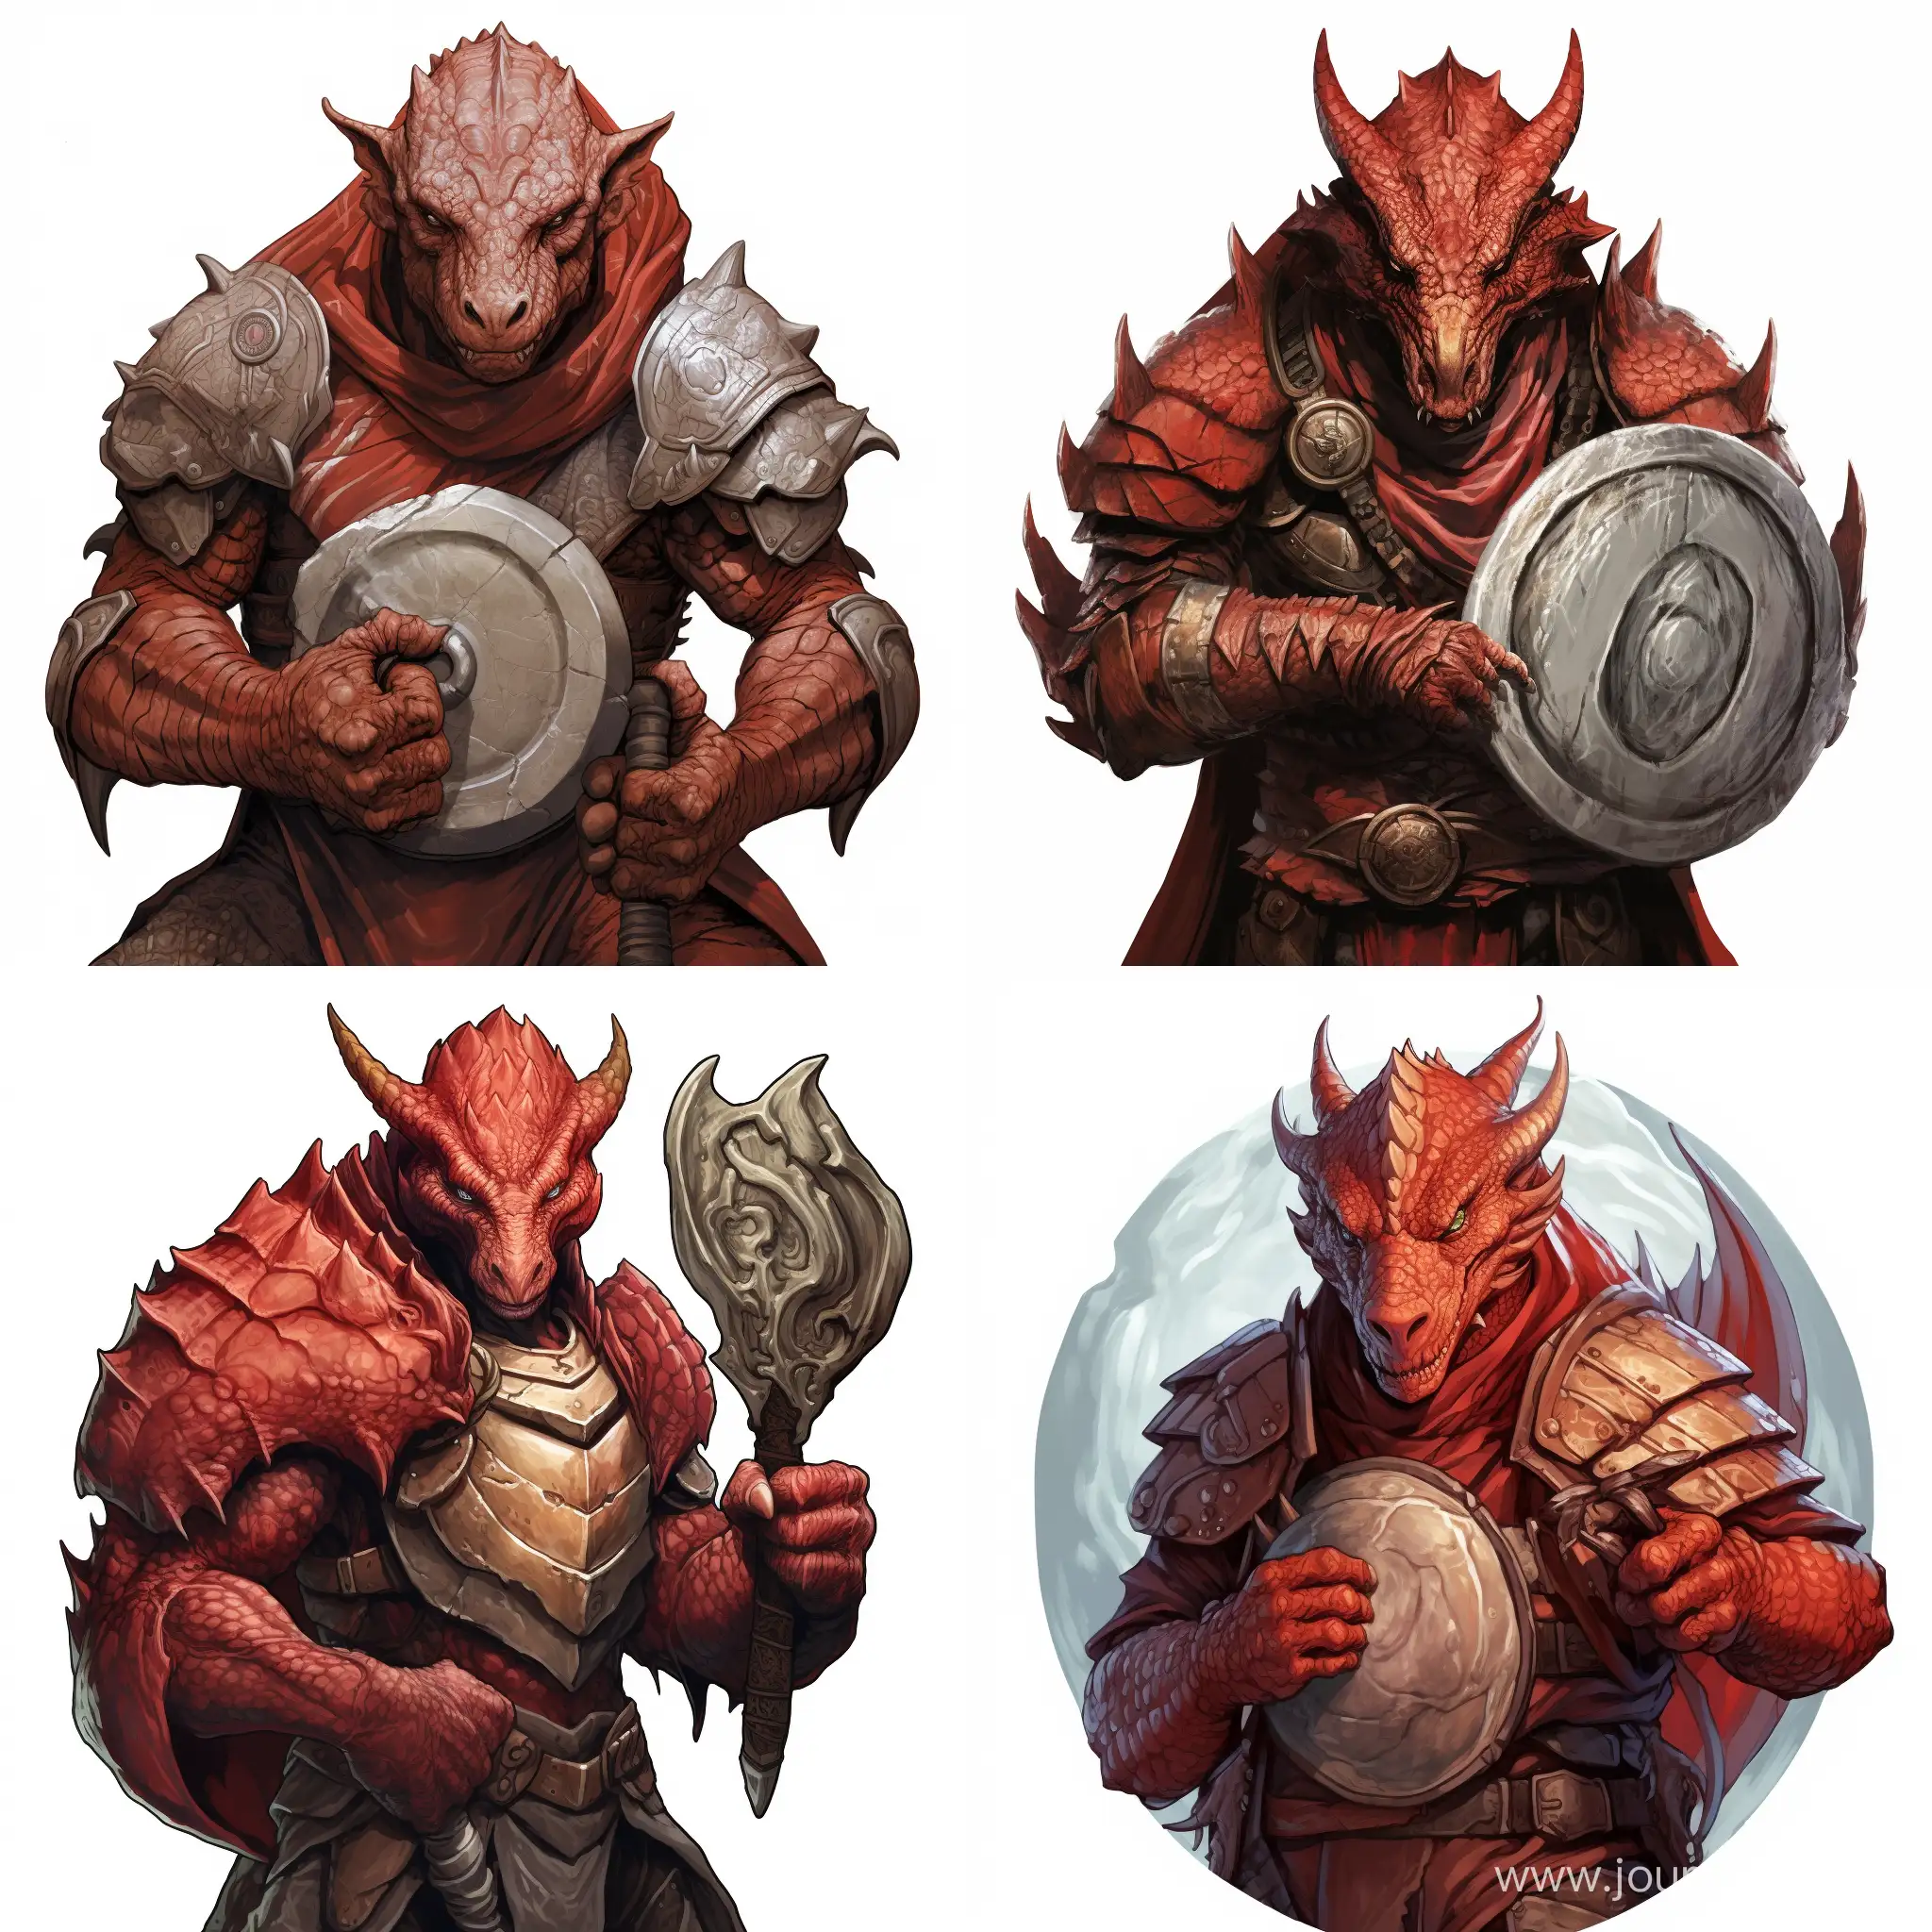 Fierce-Red-Dragonborn-Warrior-with-Hammer-and-Shield-on-White-Background